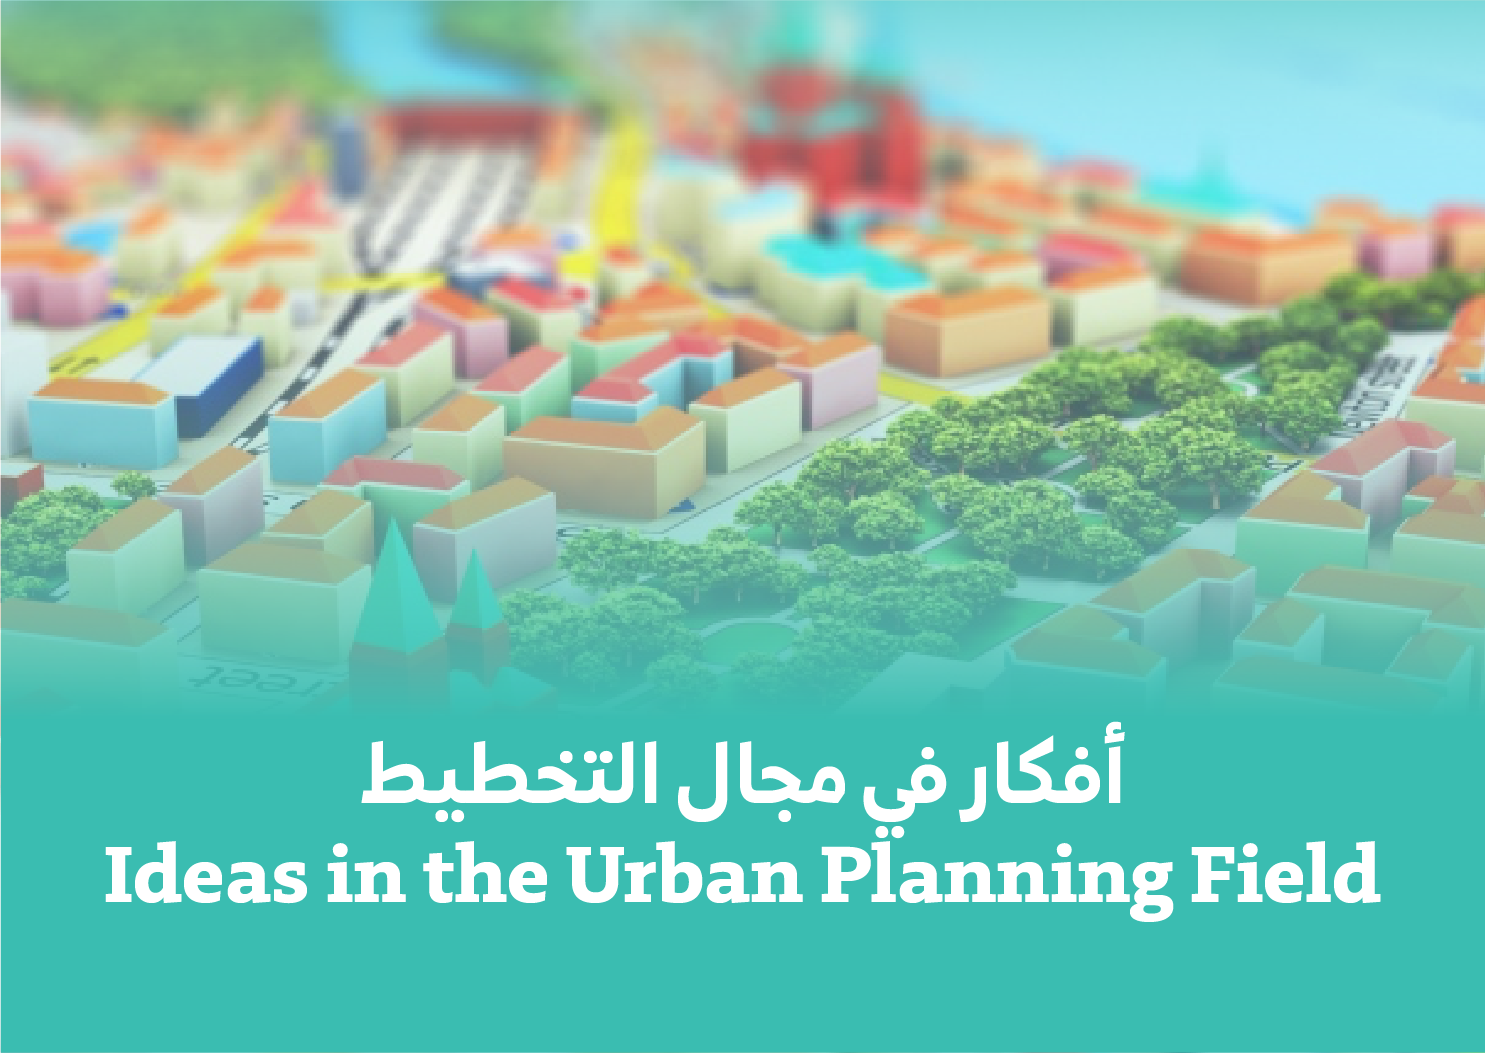 Planning Ideas for Urban Planners